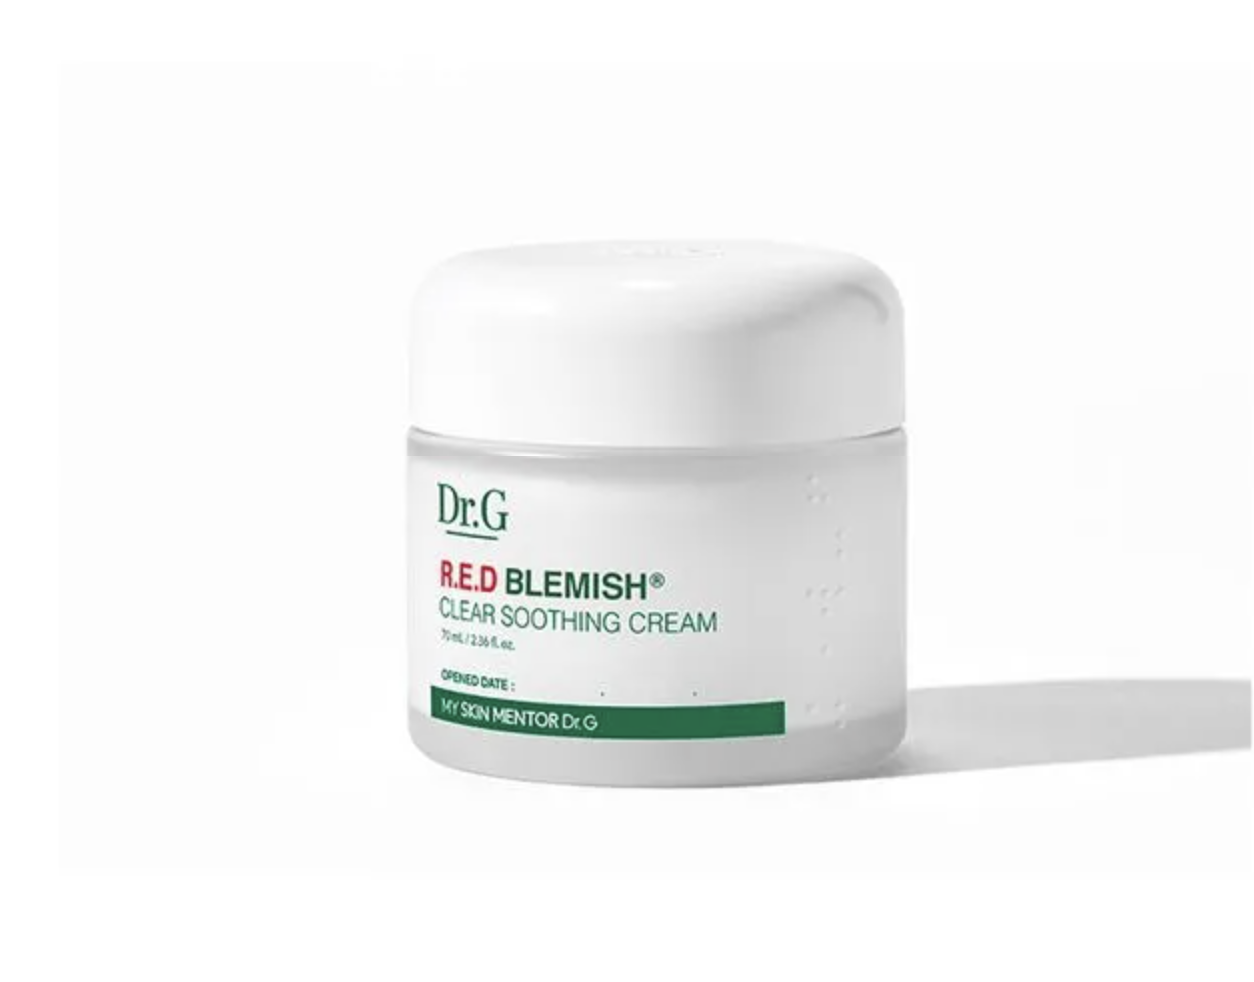 Red Blemish Clear Soothing Cream by Dr. G